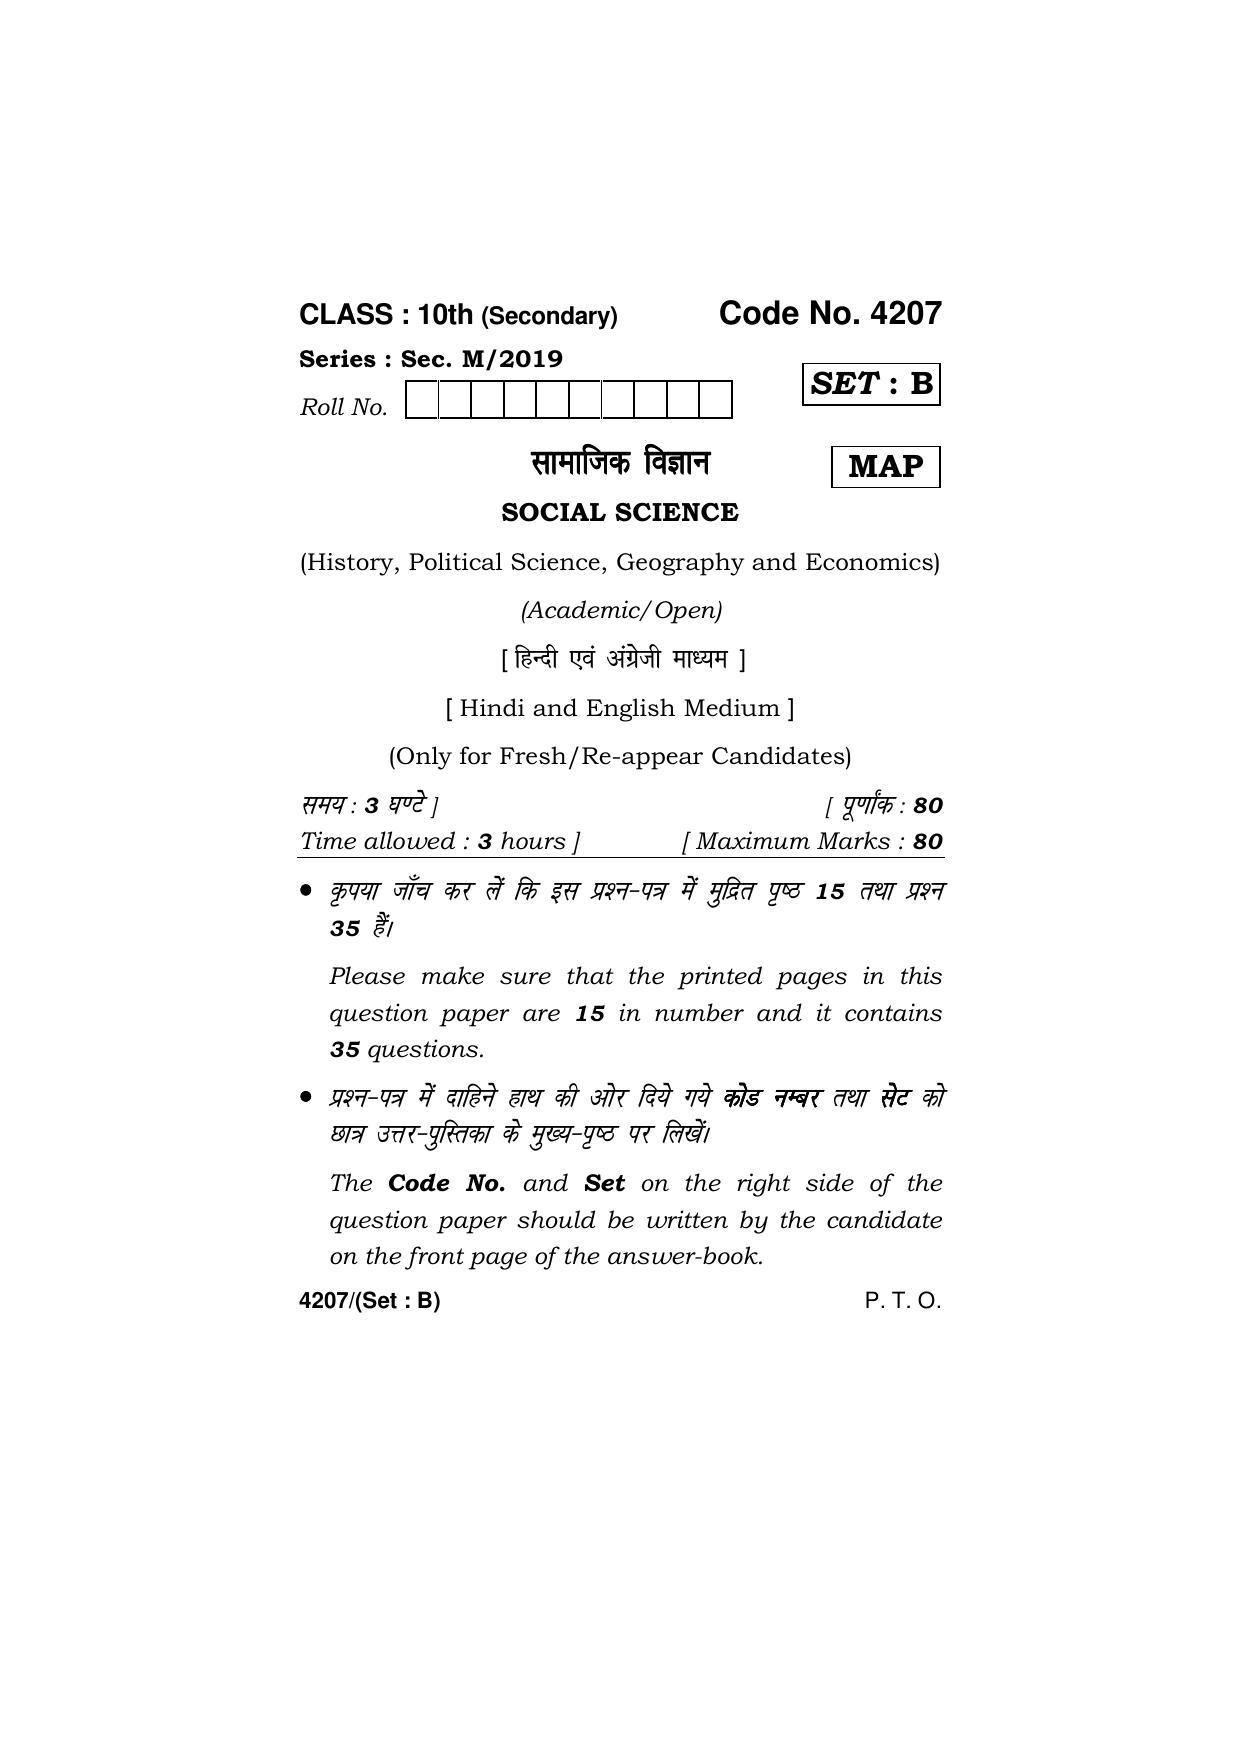 Haryana Board HBSE Class 10 Social Science (All Set) 2019 Question Paper - Page 16